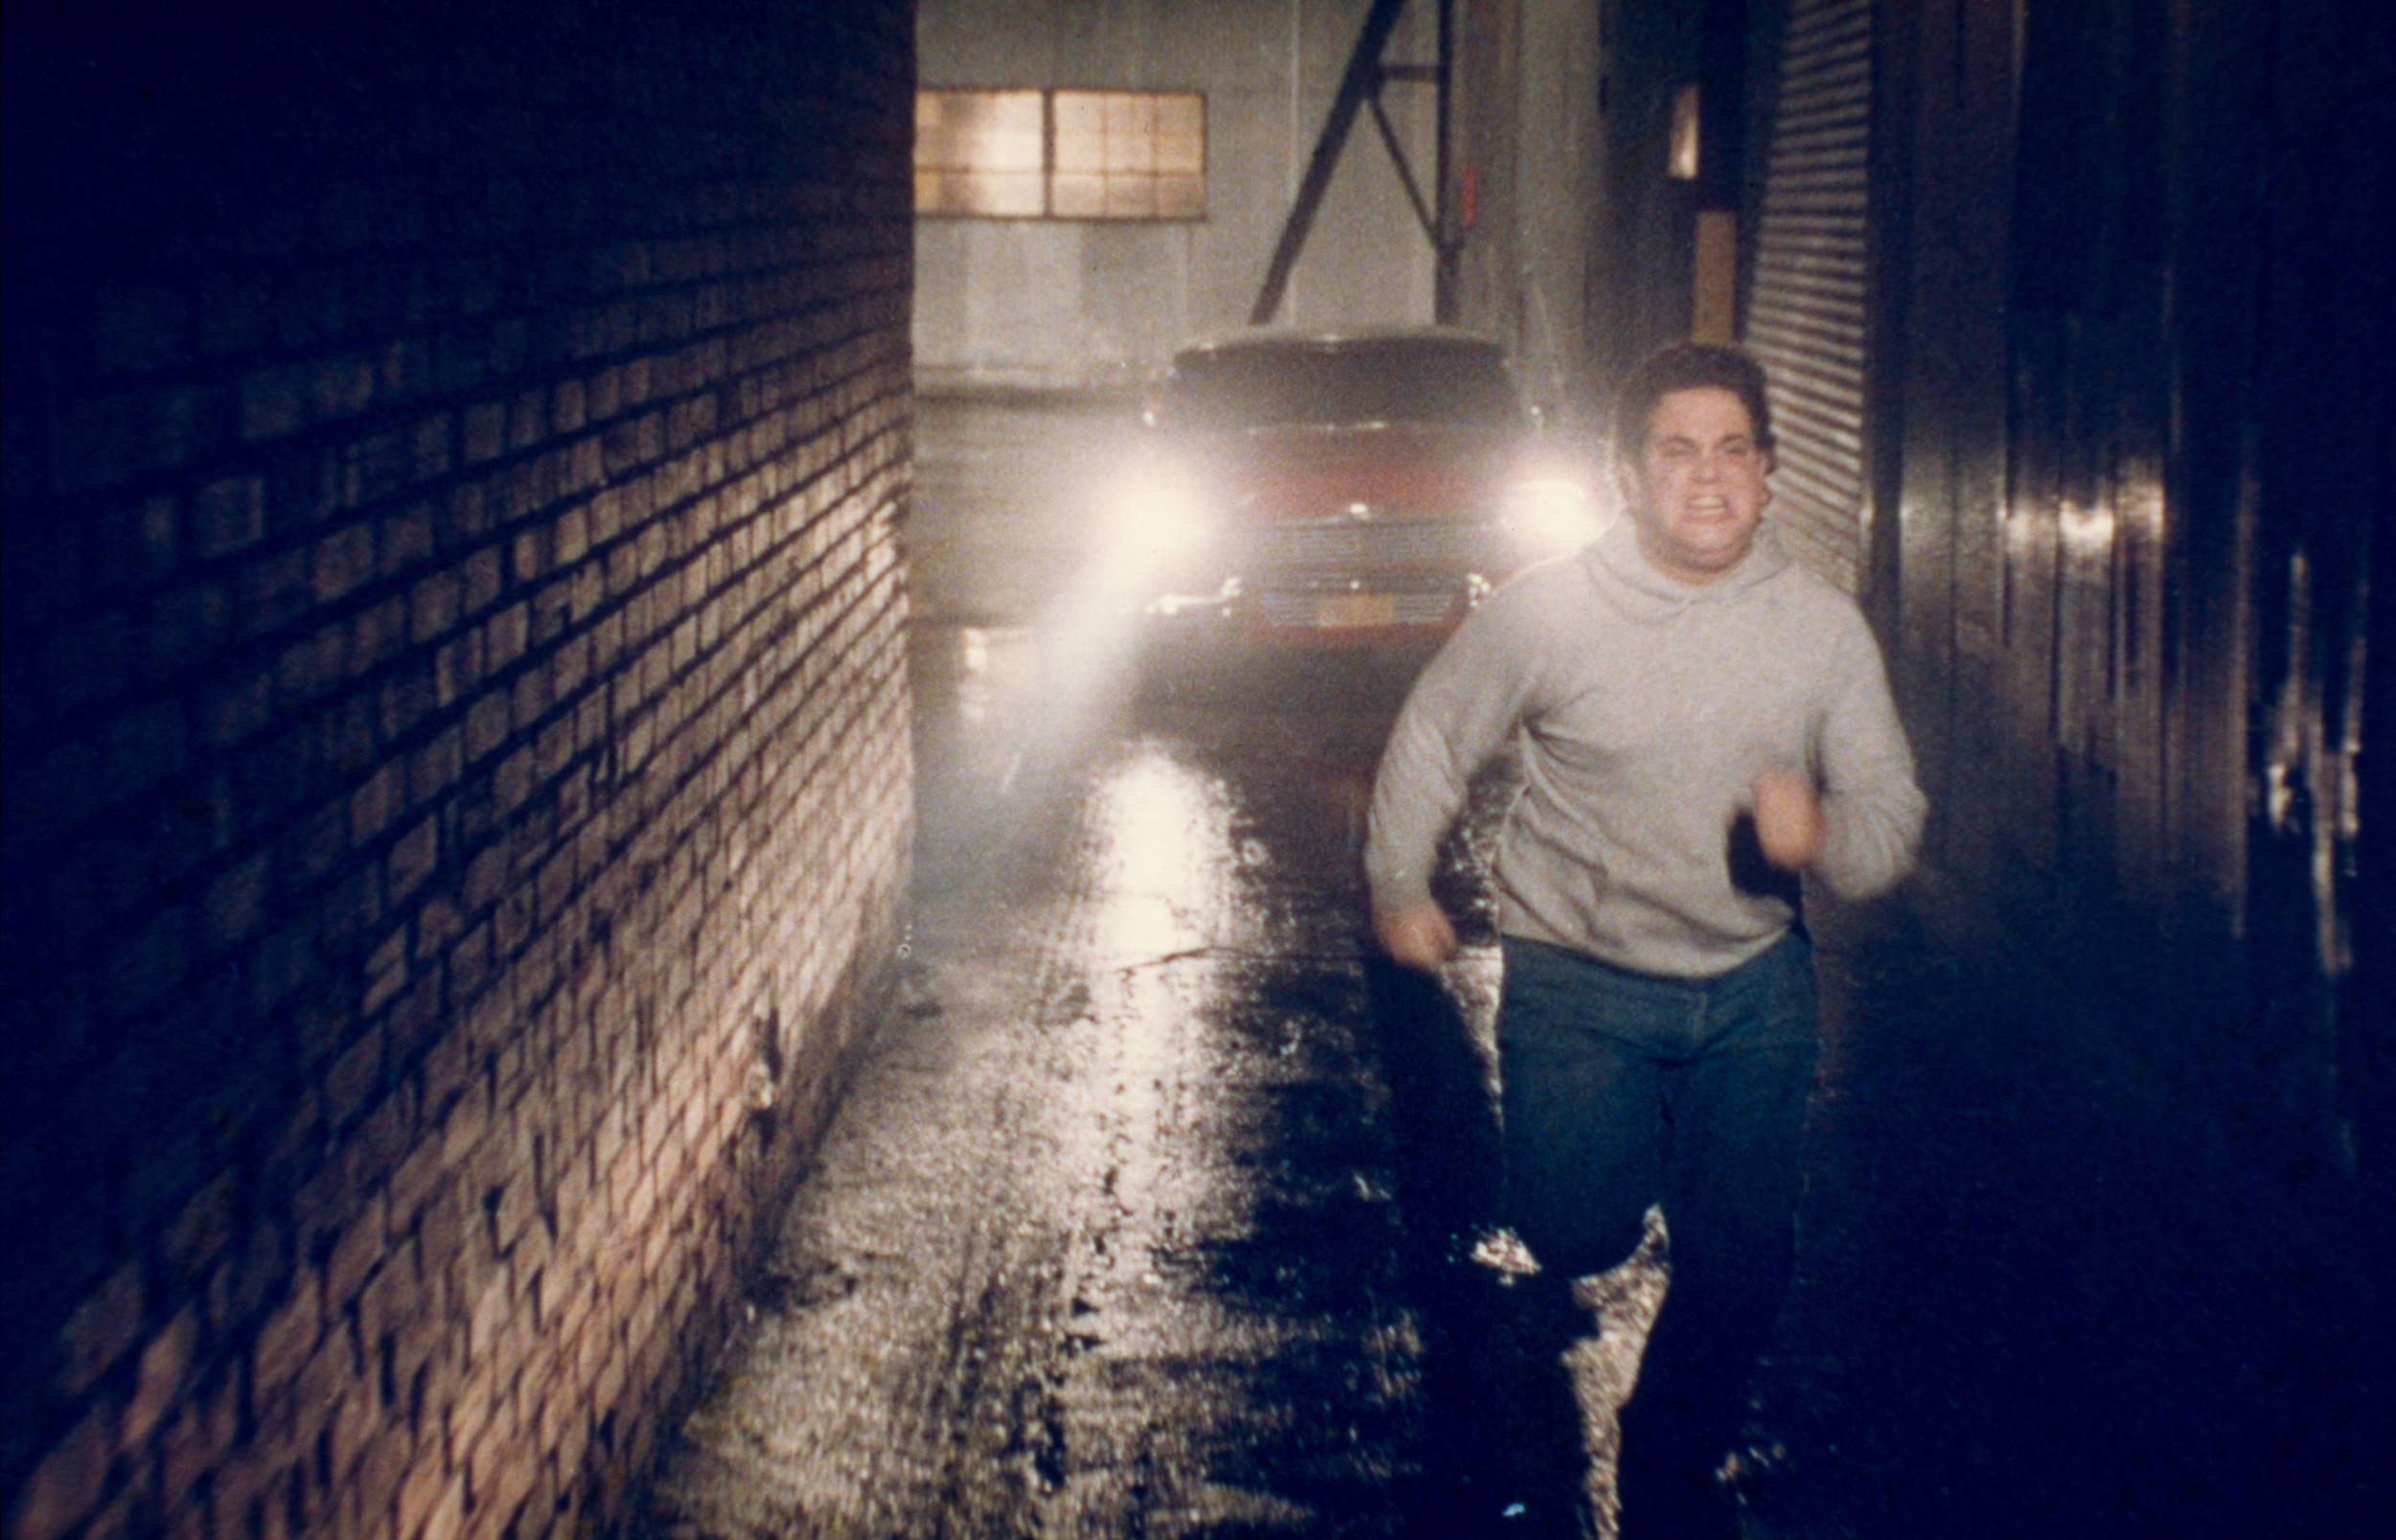 photo from the 1983 movie "Christine." It pictures Malcolm Danare as "Moochie," one of the characters who had been bullying Arnie, who owns the haunted 1958 Plymouth Fury named Christine. Christine is now, in this scene, chasing Moochie down a very narrow, dark alley, headlights beaming as the heavier-set Moochie desperately runs with terror in his eyes.